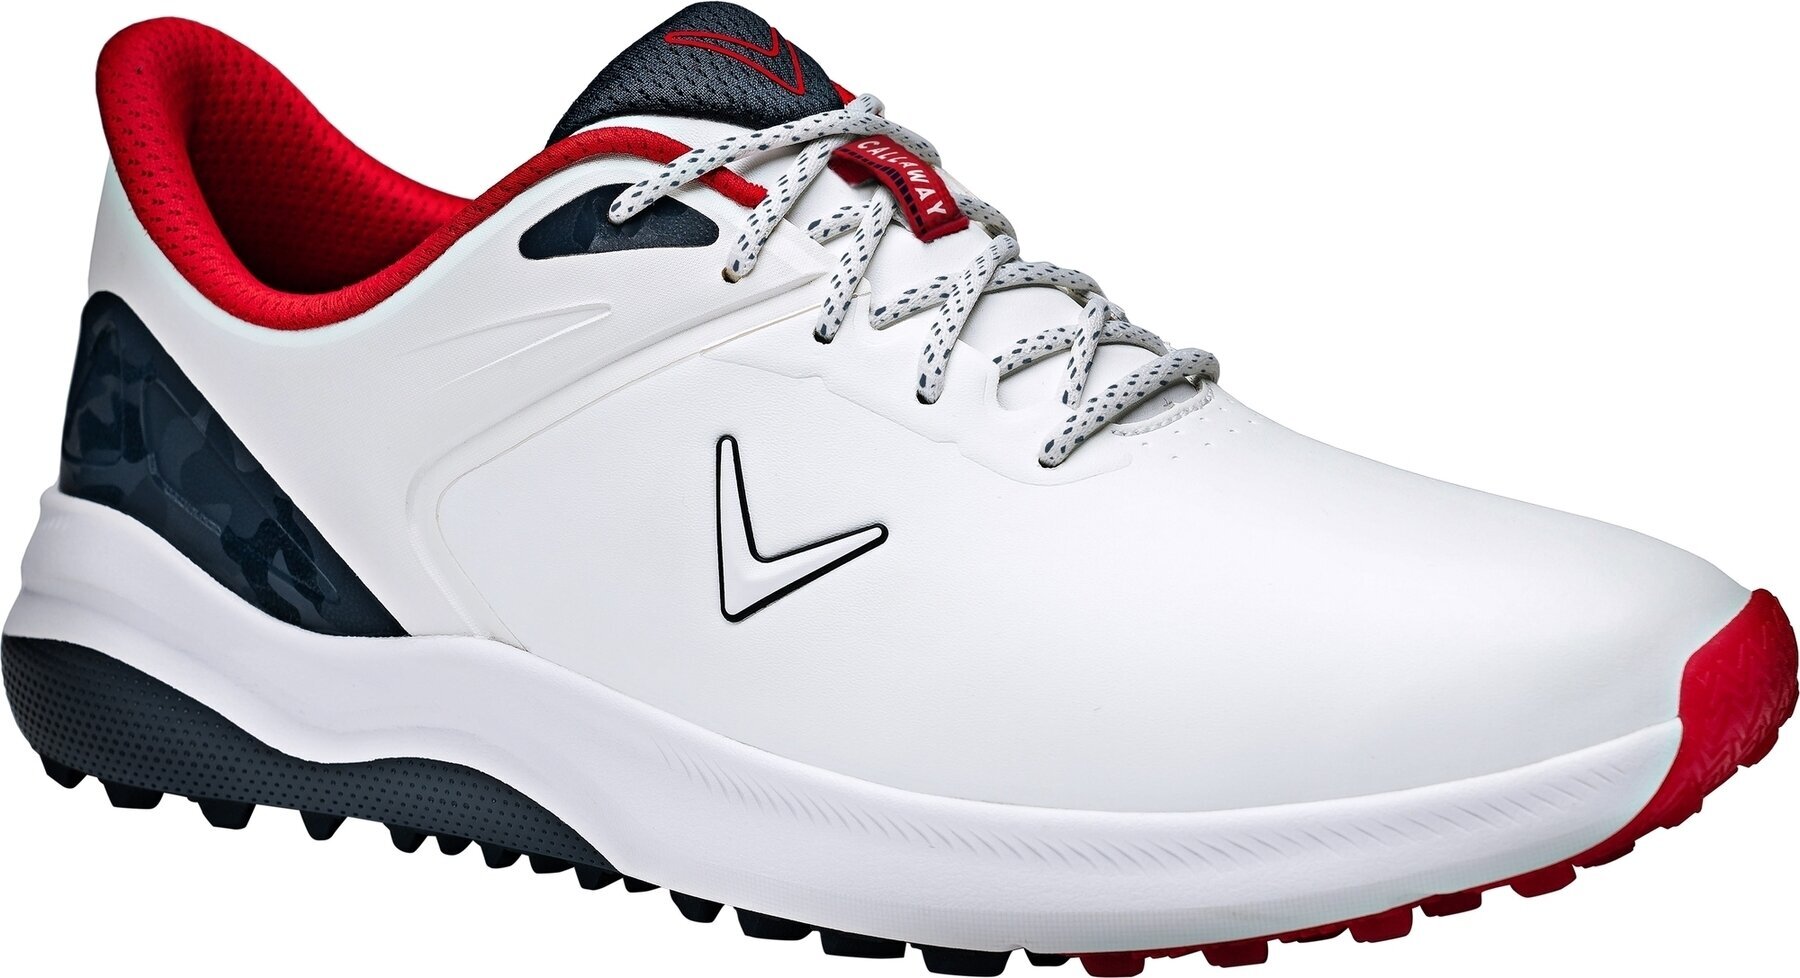 Chaussures de golf pour hommes Callaway Lazer Mens Golf Shoes White/Navy/Red 41